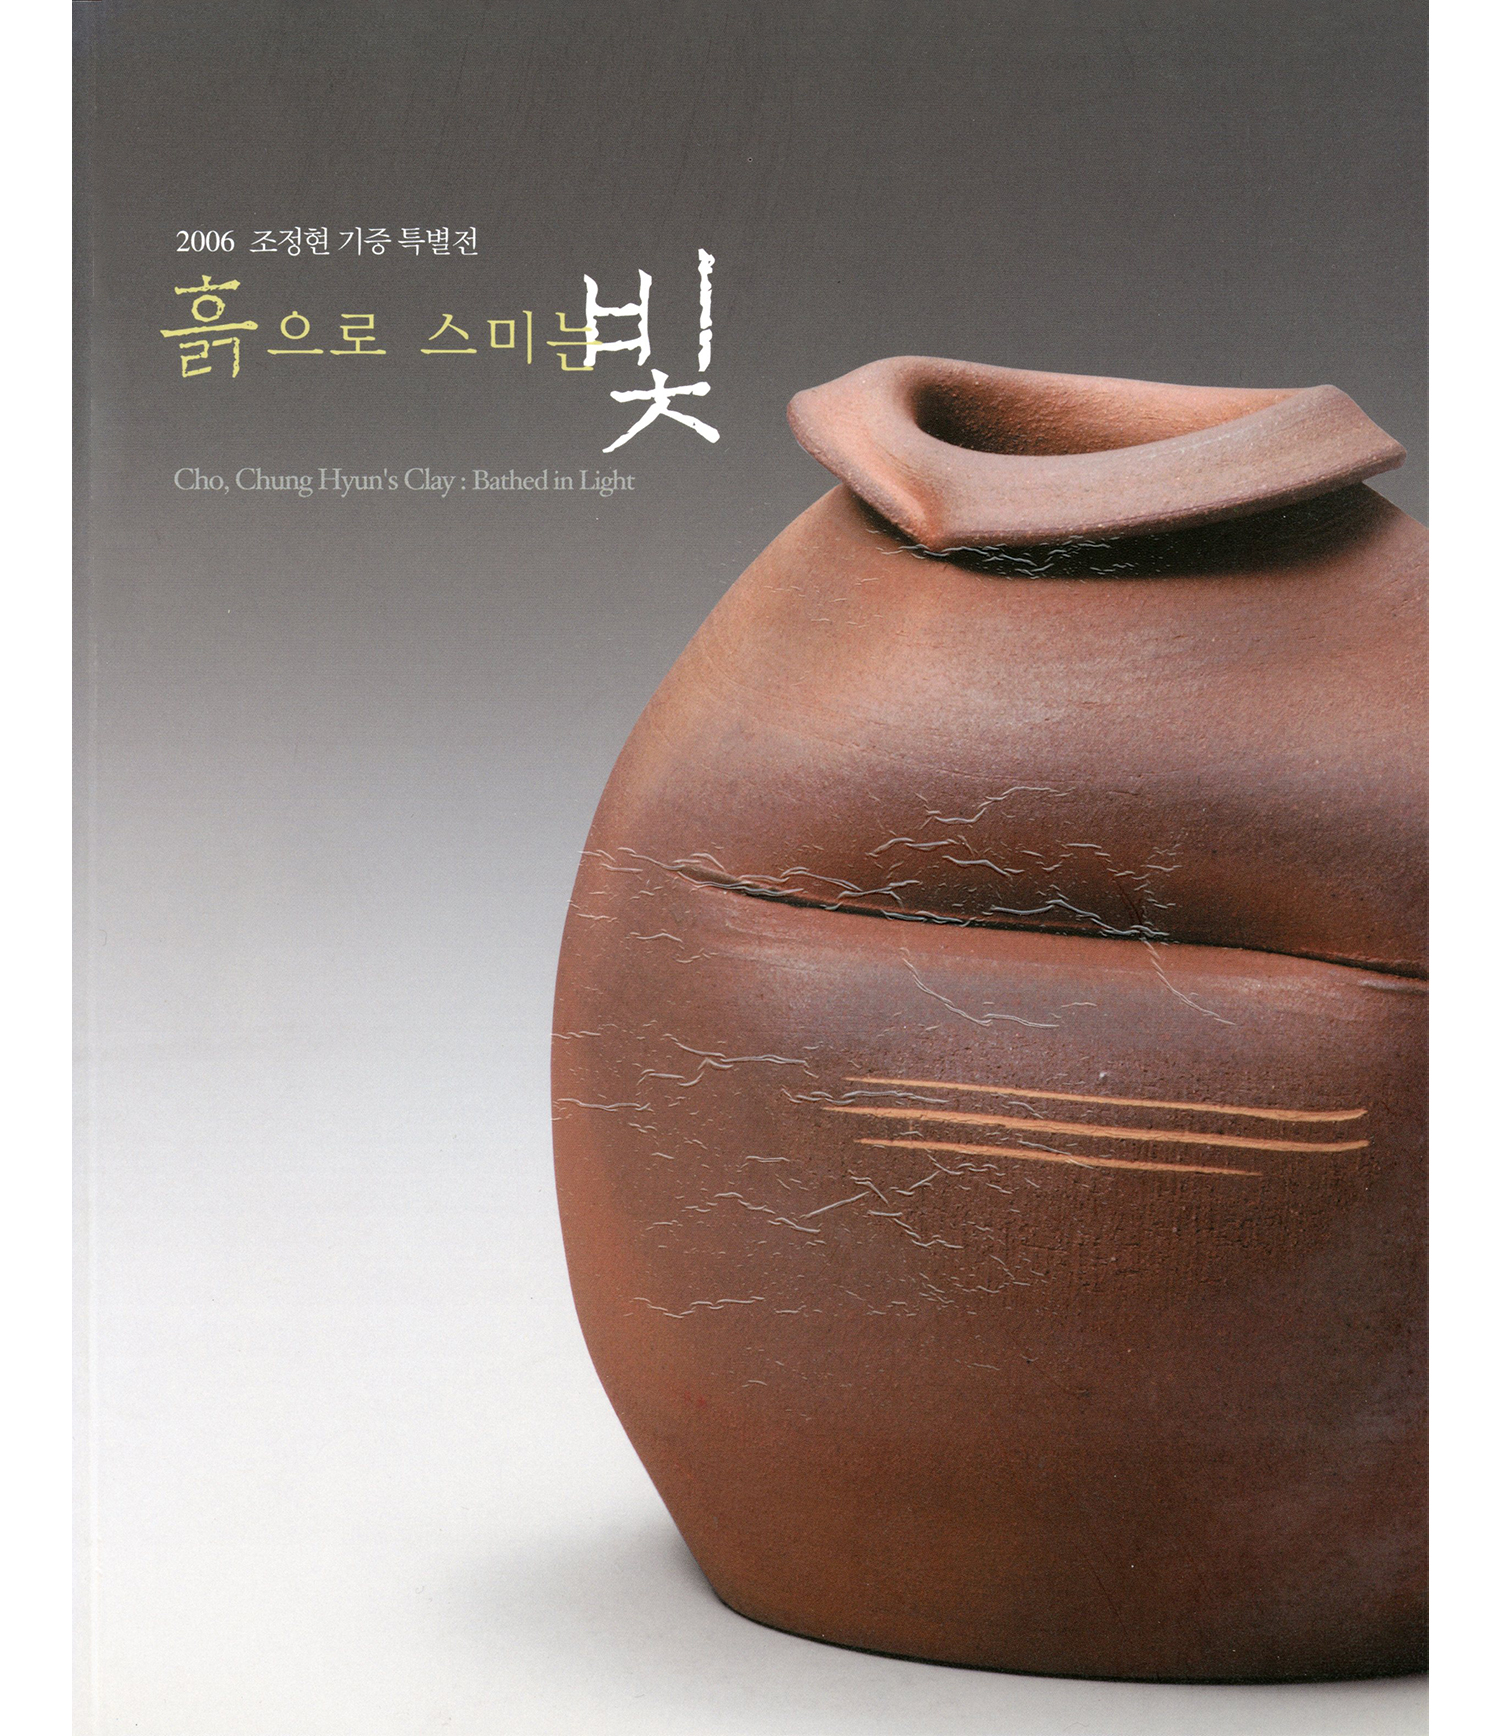 Cho, Chung Hyun’s Clay: Bathed in Light